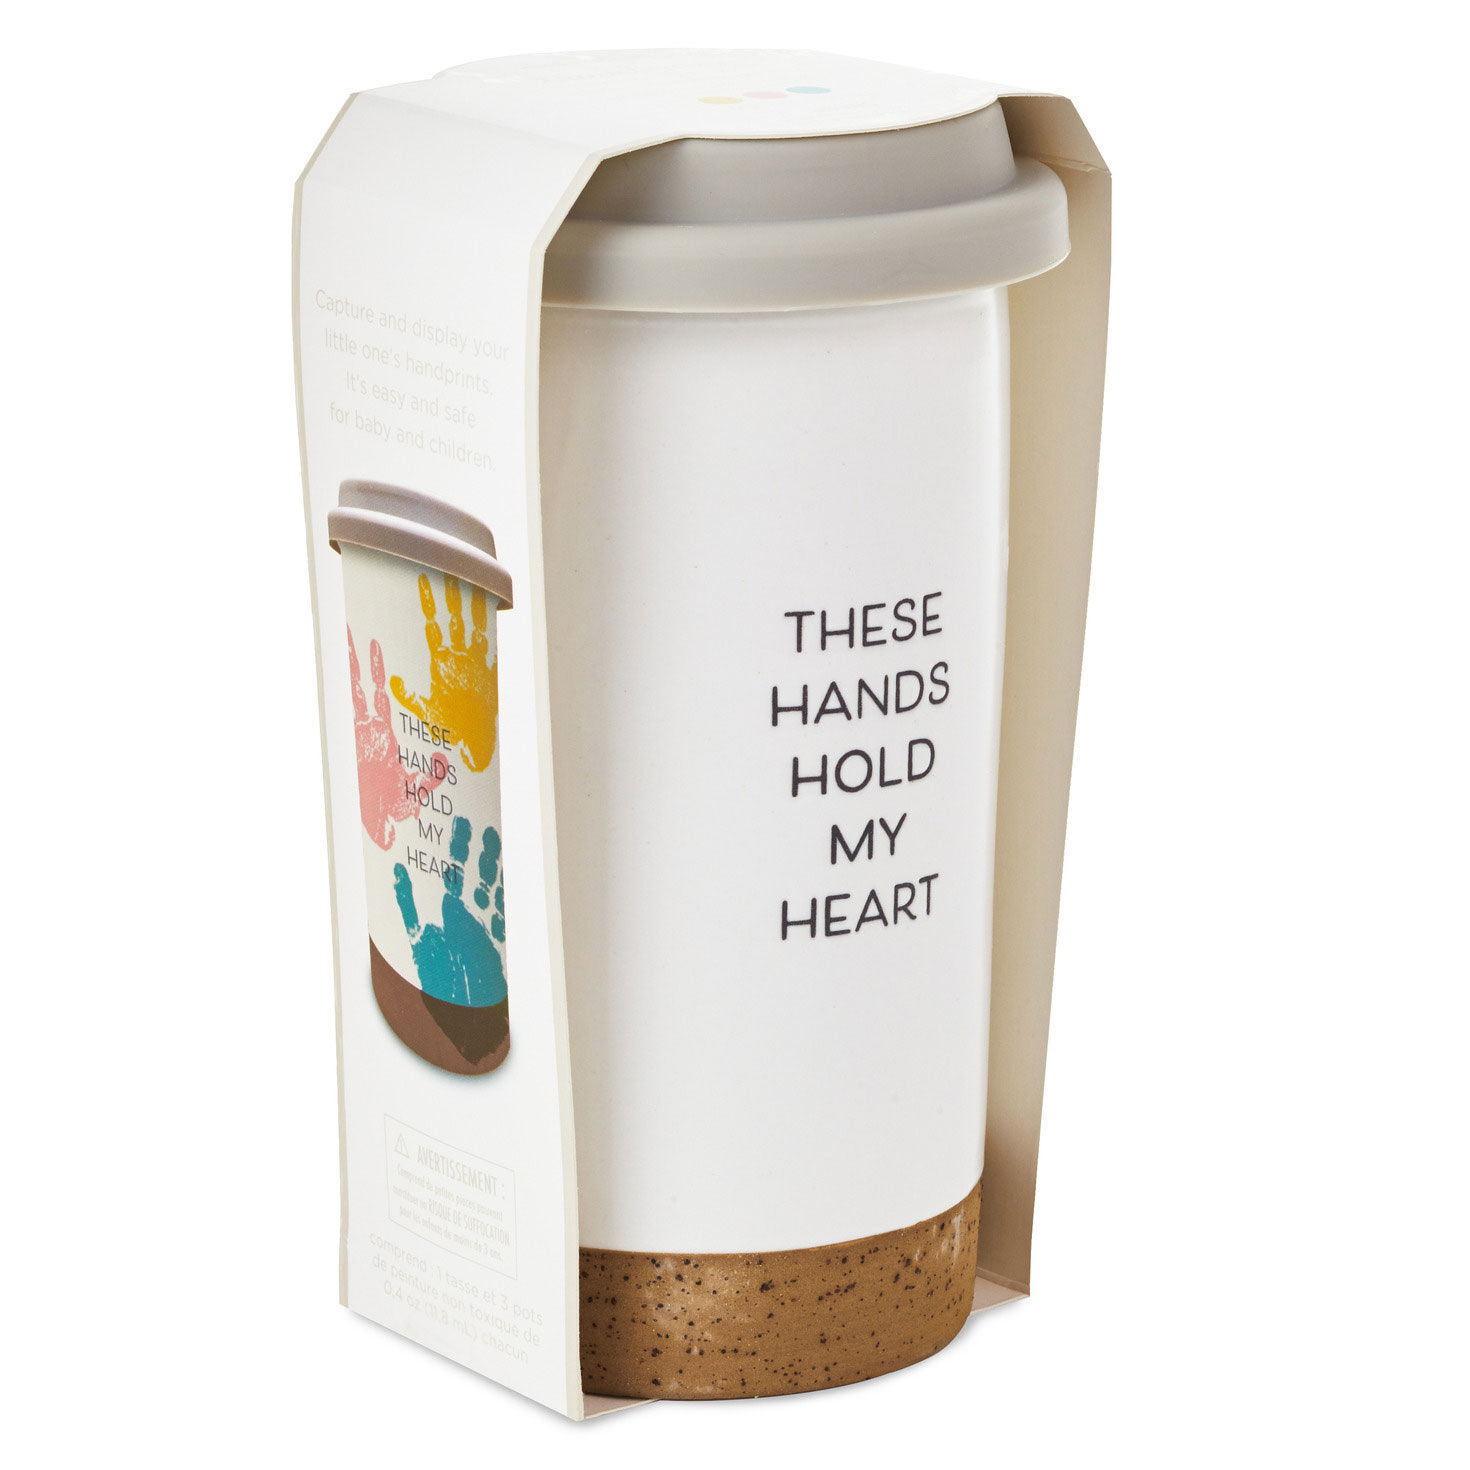 These Hands Hold My Heart Ceramic Travel Mug, 12.5 oz. for only USD 24.99 | Hallmark